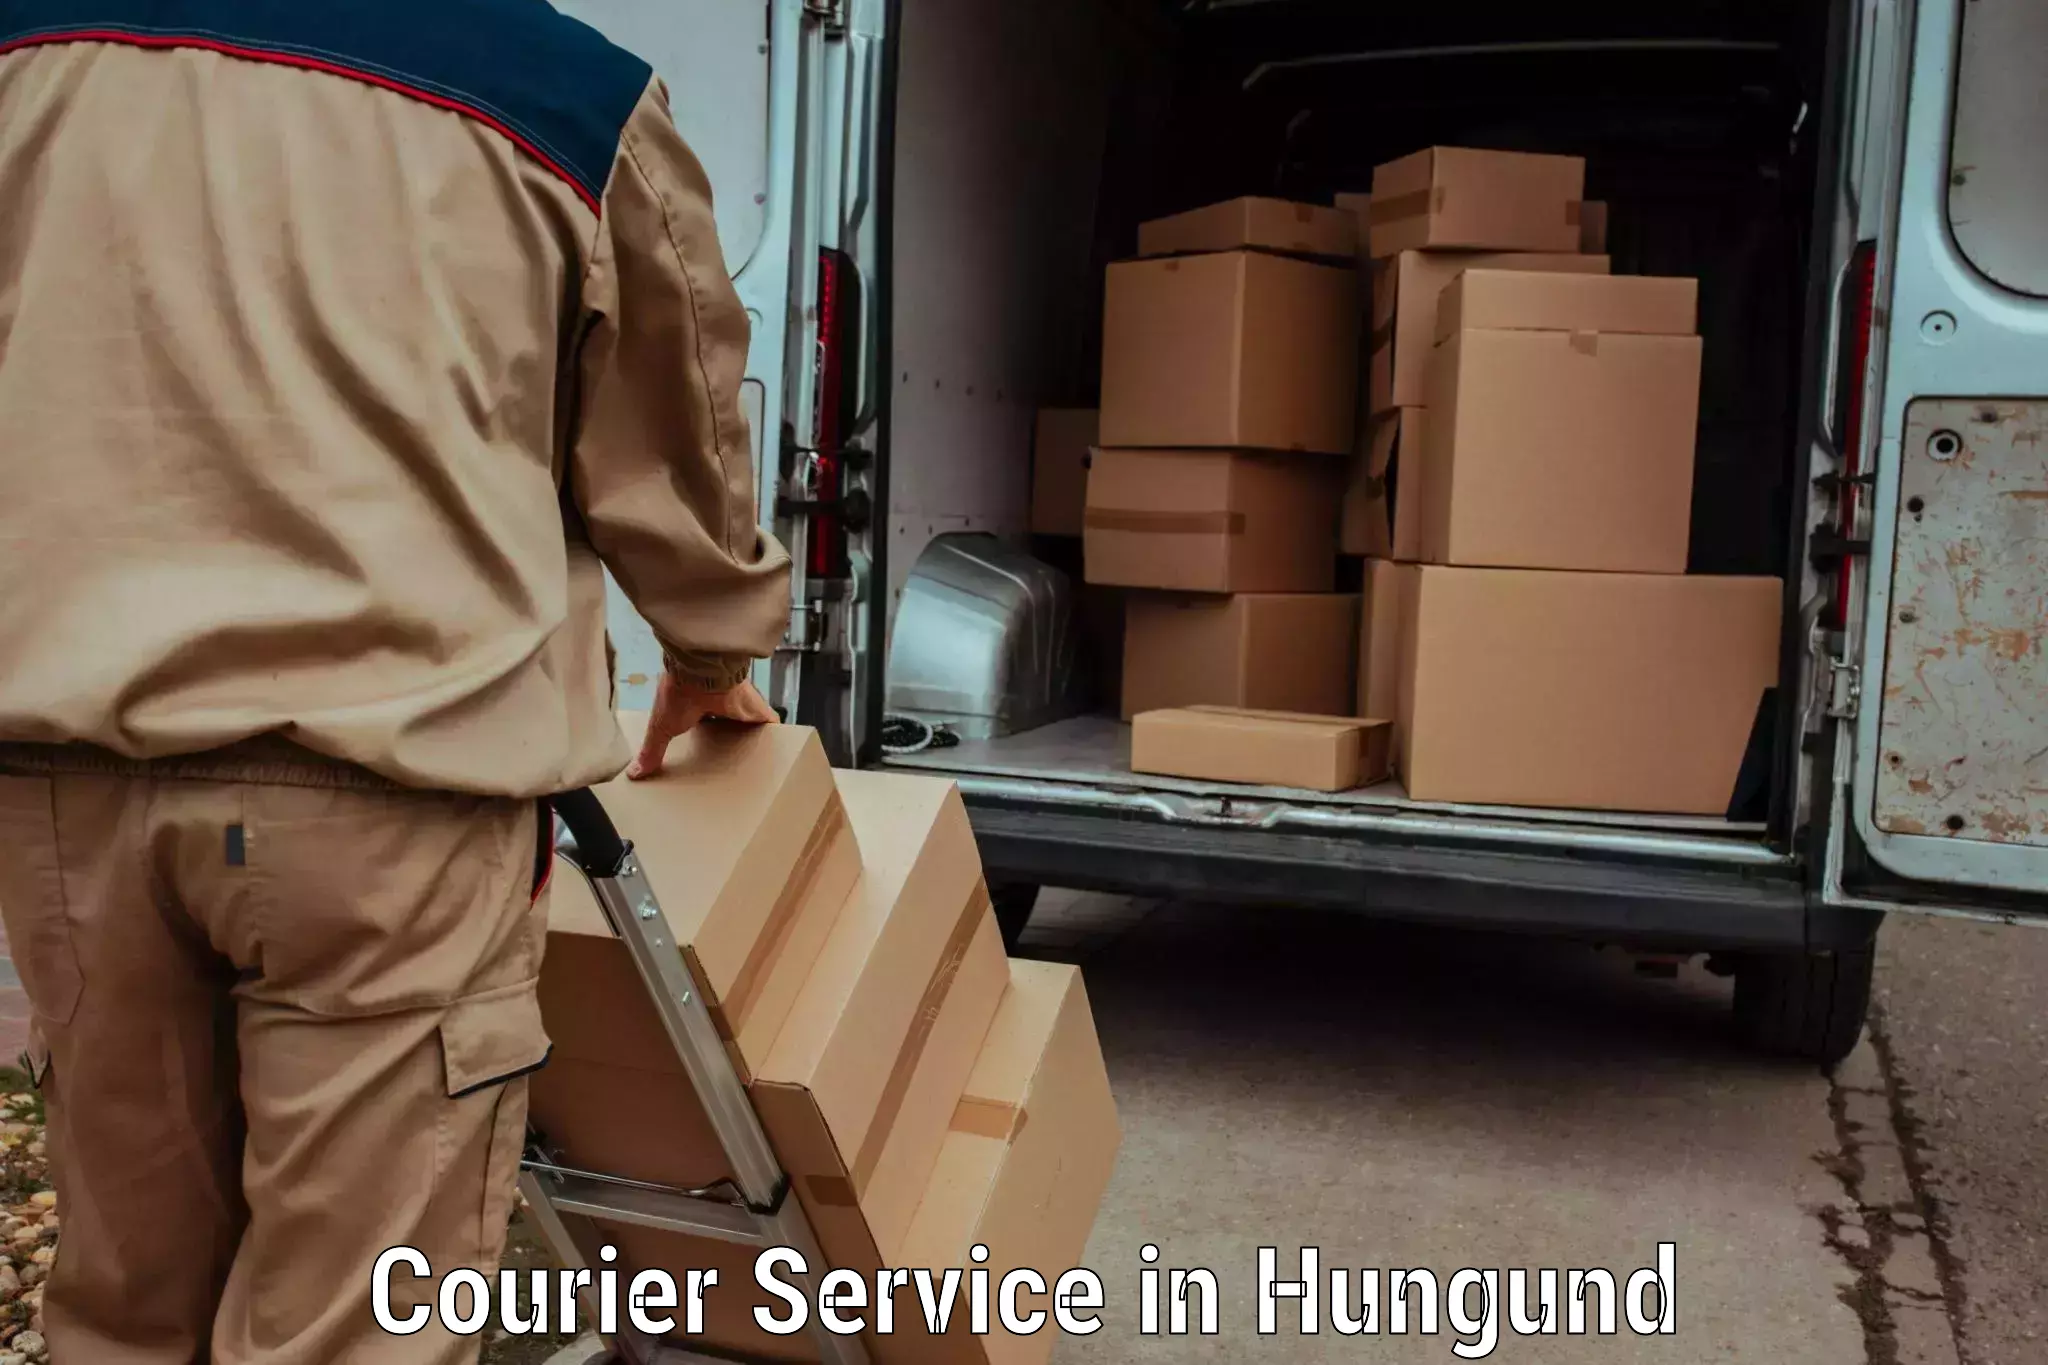 Specialized courier services in Hungund